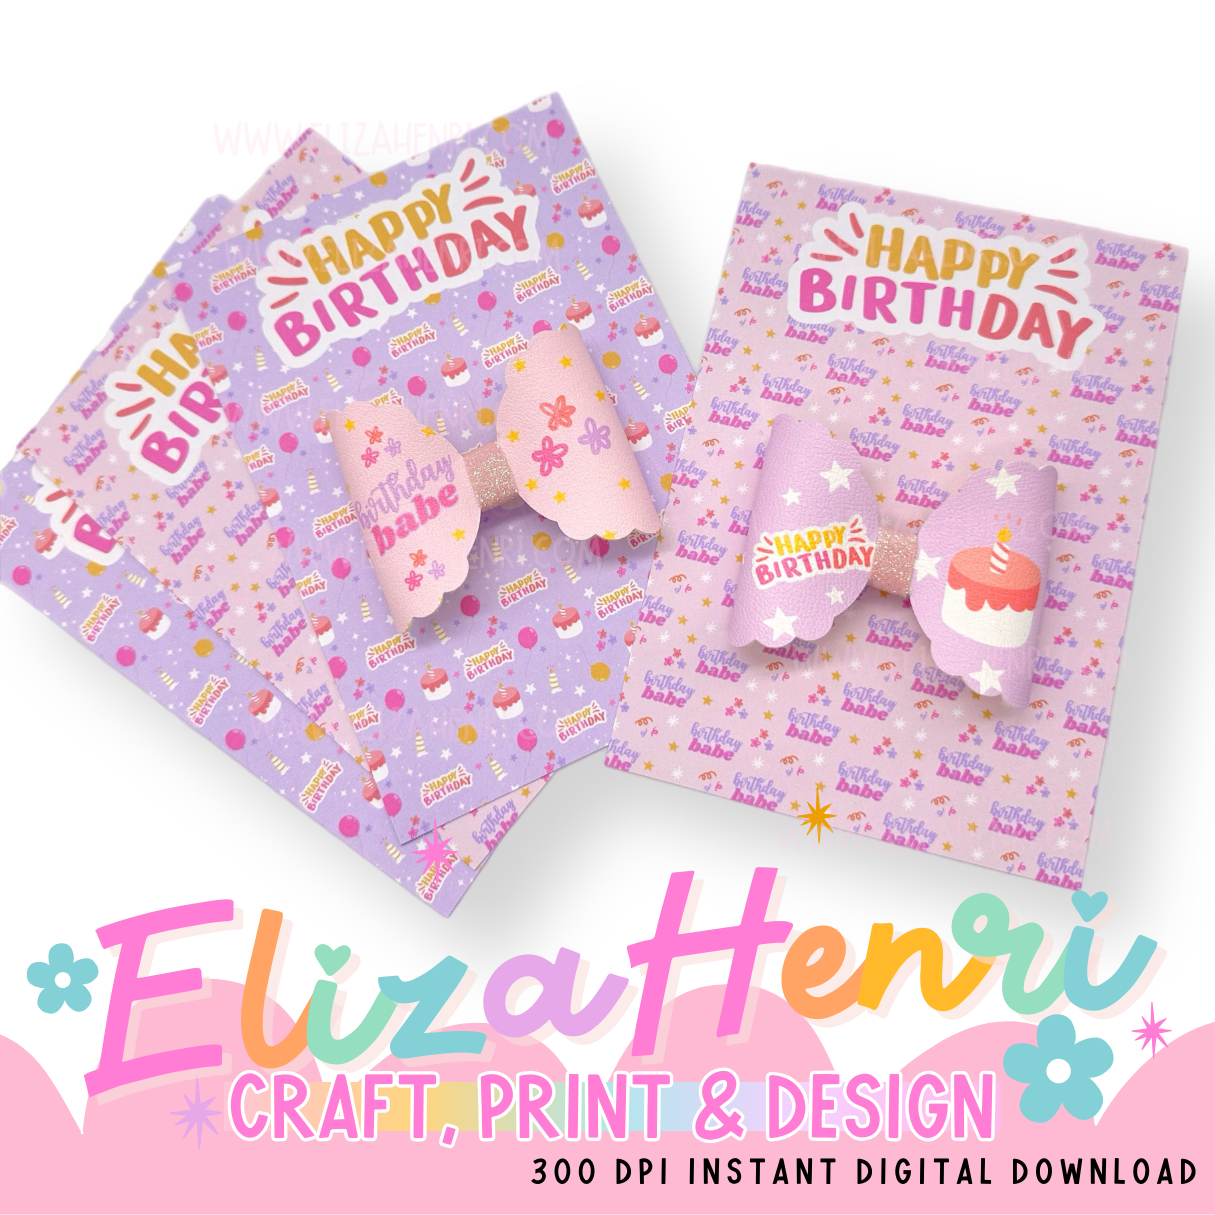 Happy Birthday Pink & Lilac Bow Cards A6 Size- Digital Download- 2 Designs